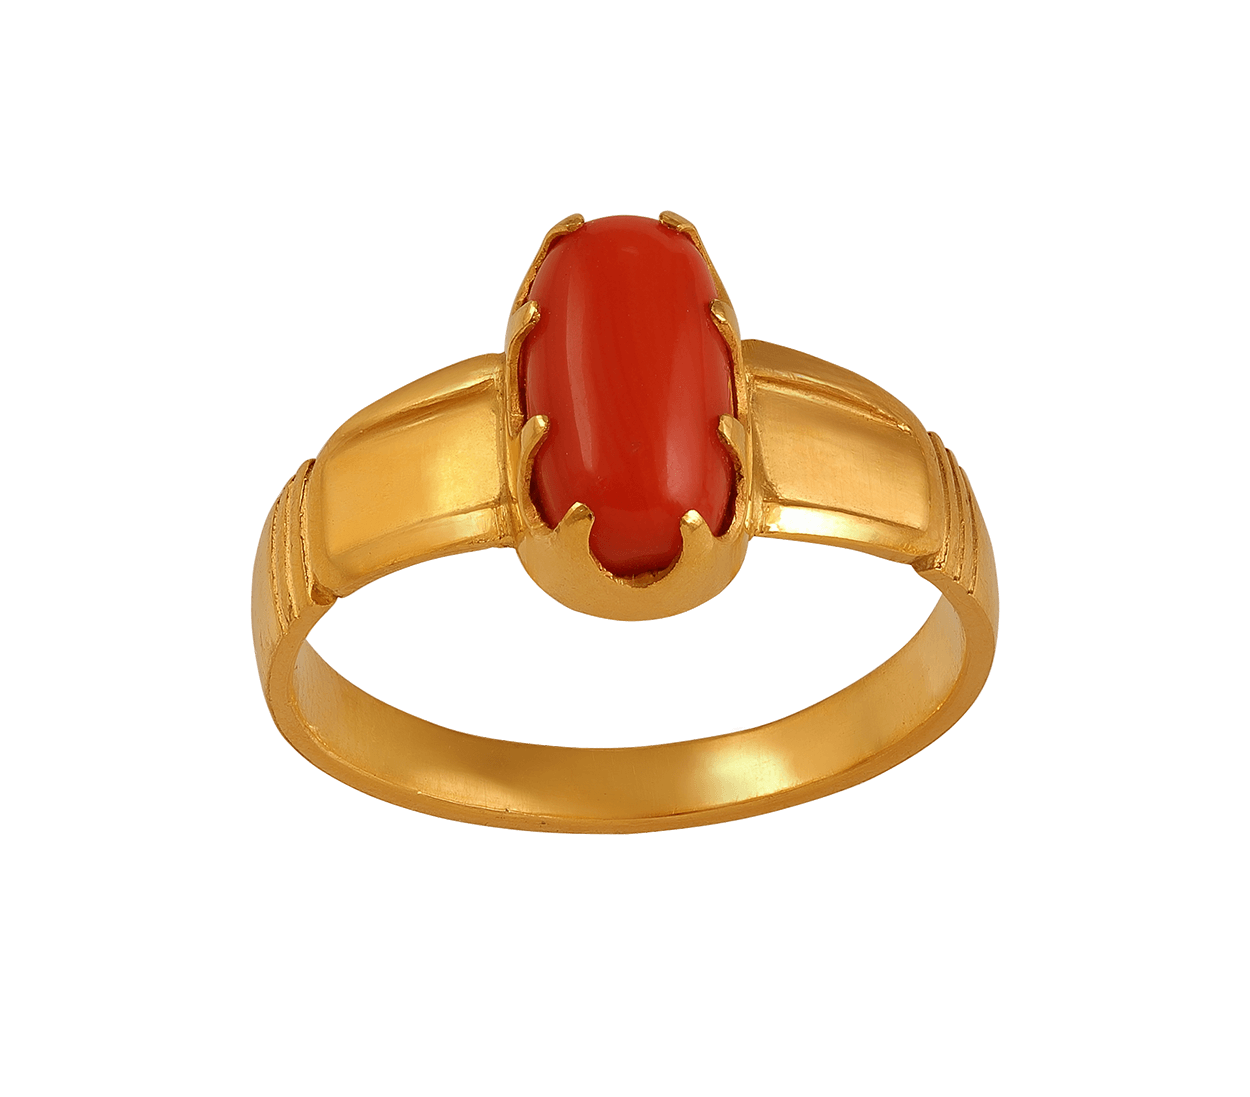 Buy White Coral Ring Online In India - Etsy India